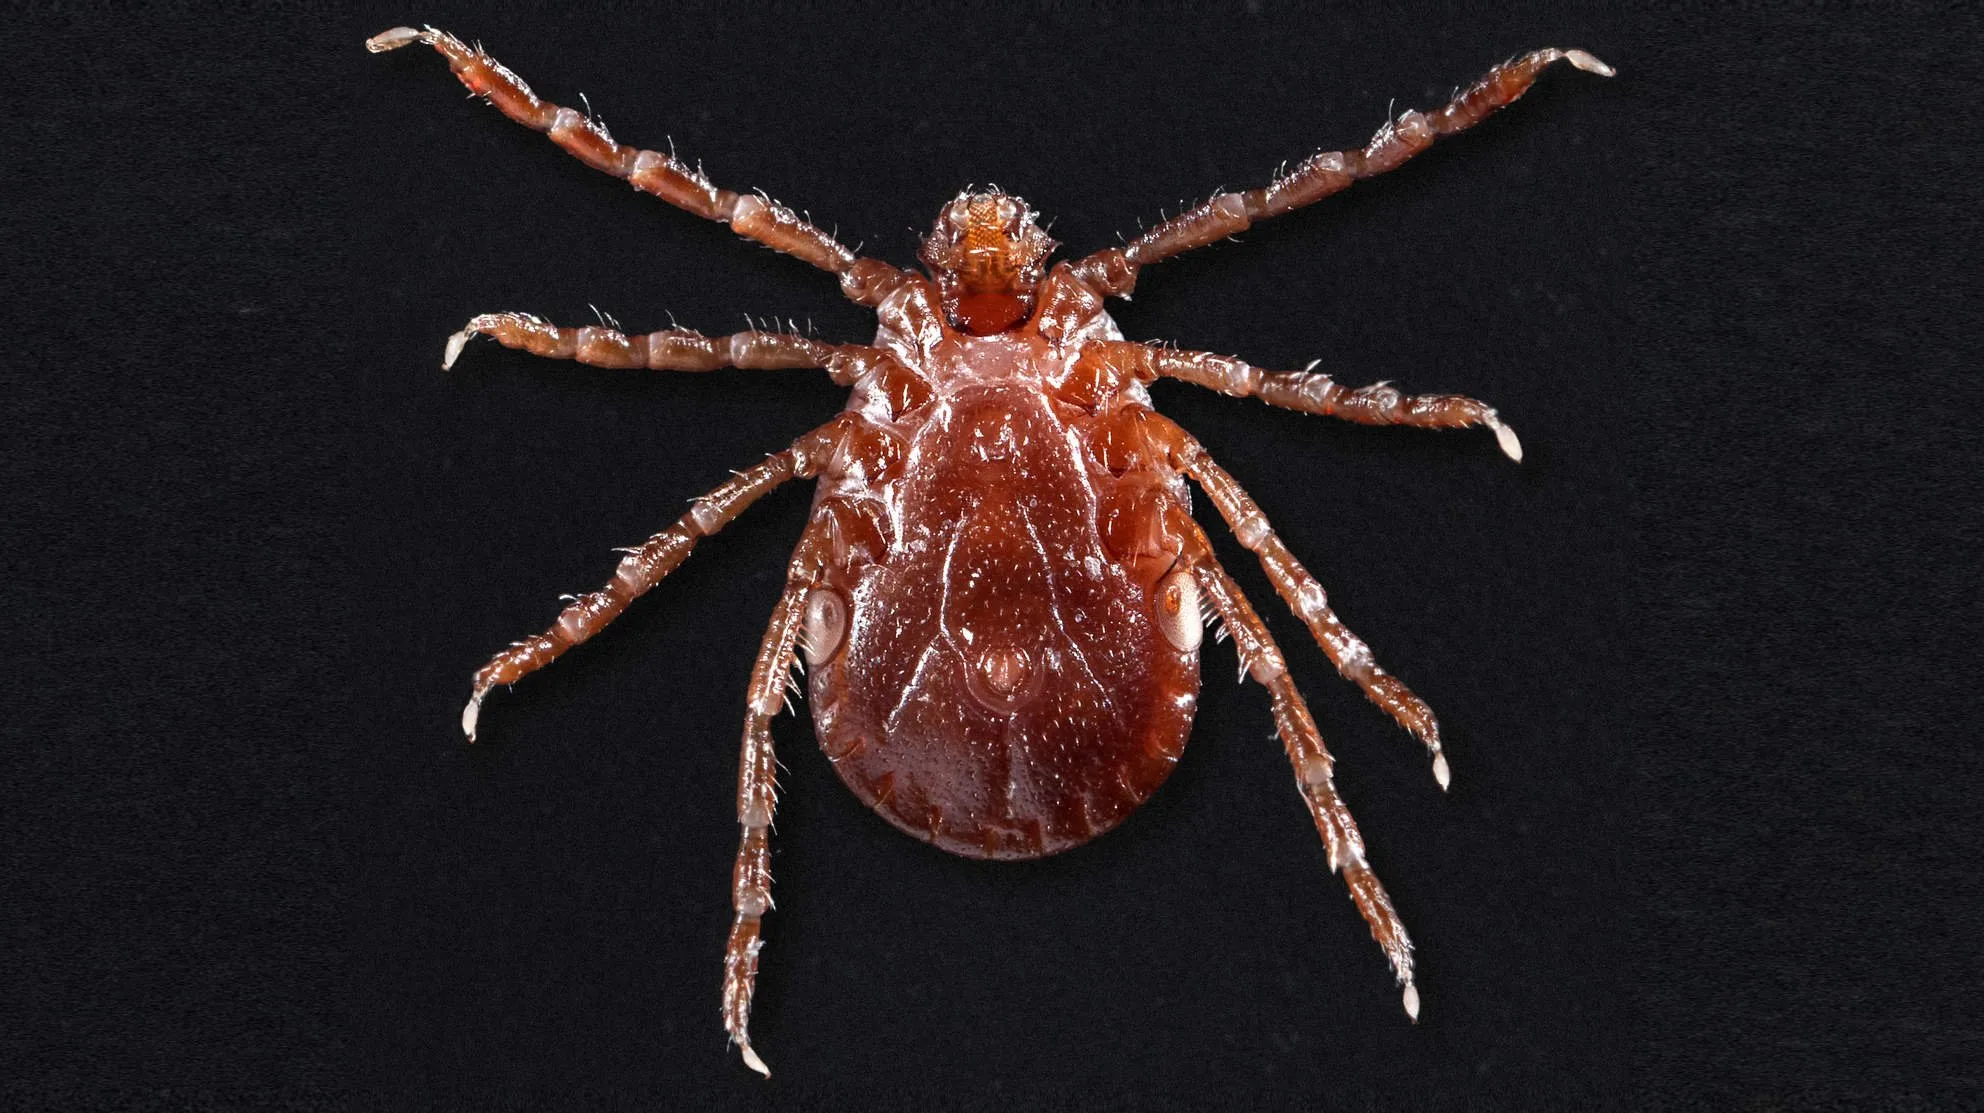 Asian Longhorned Ticks Are A Menace But Are They A Health Hazard?